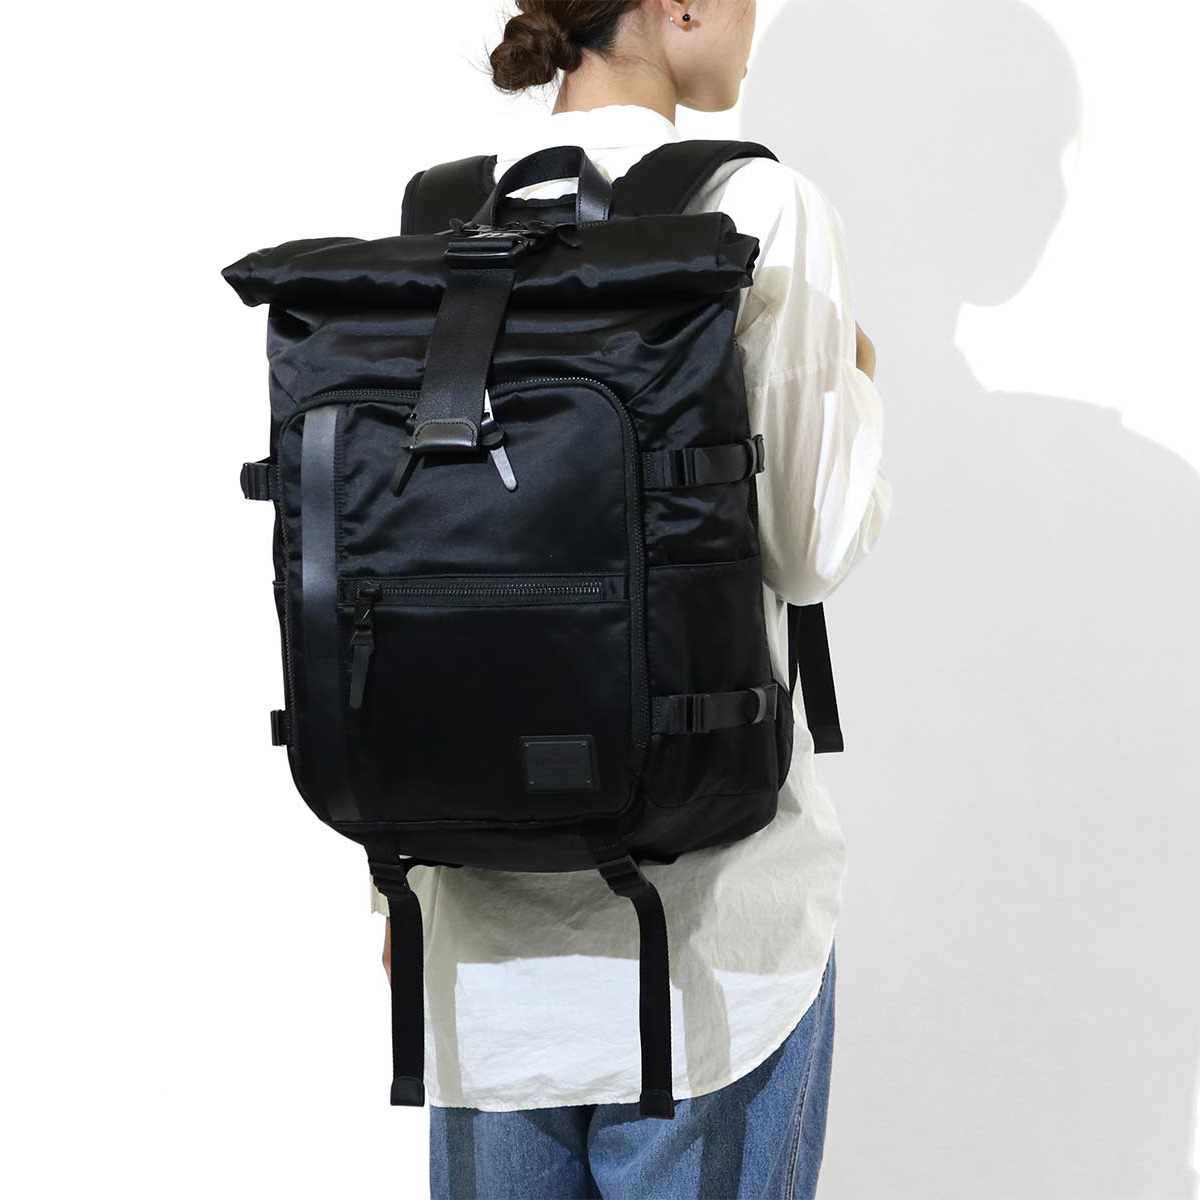 GALLERIA Bag-Luggage: MAKAVELIC backpack MAKAVELIC backpack LIMITED EXCLUSIVE ROLLTOP BACKPACK ...